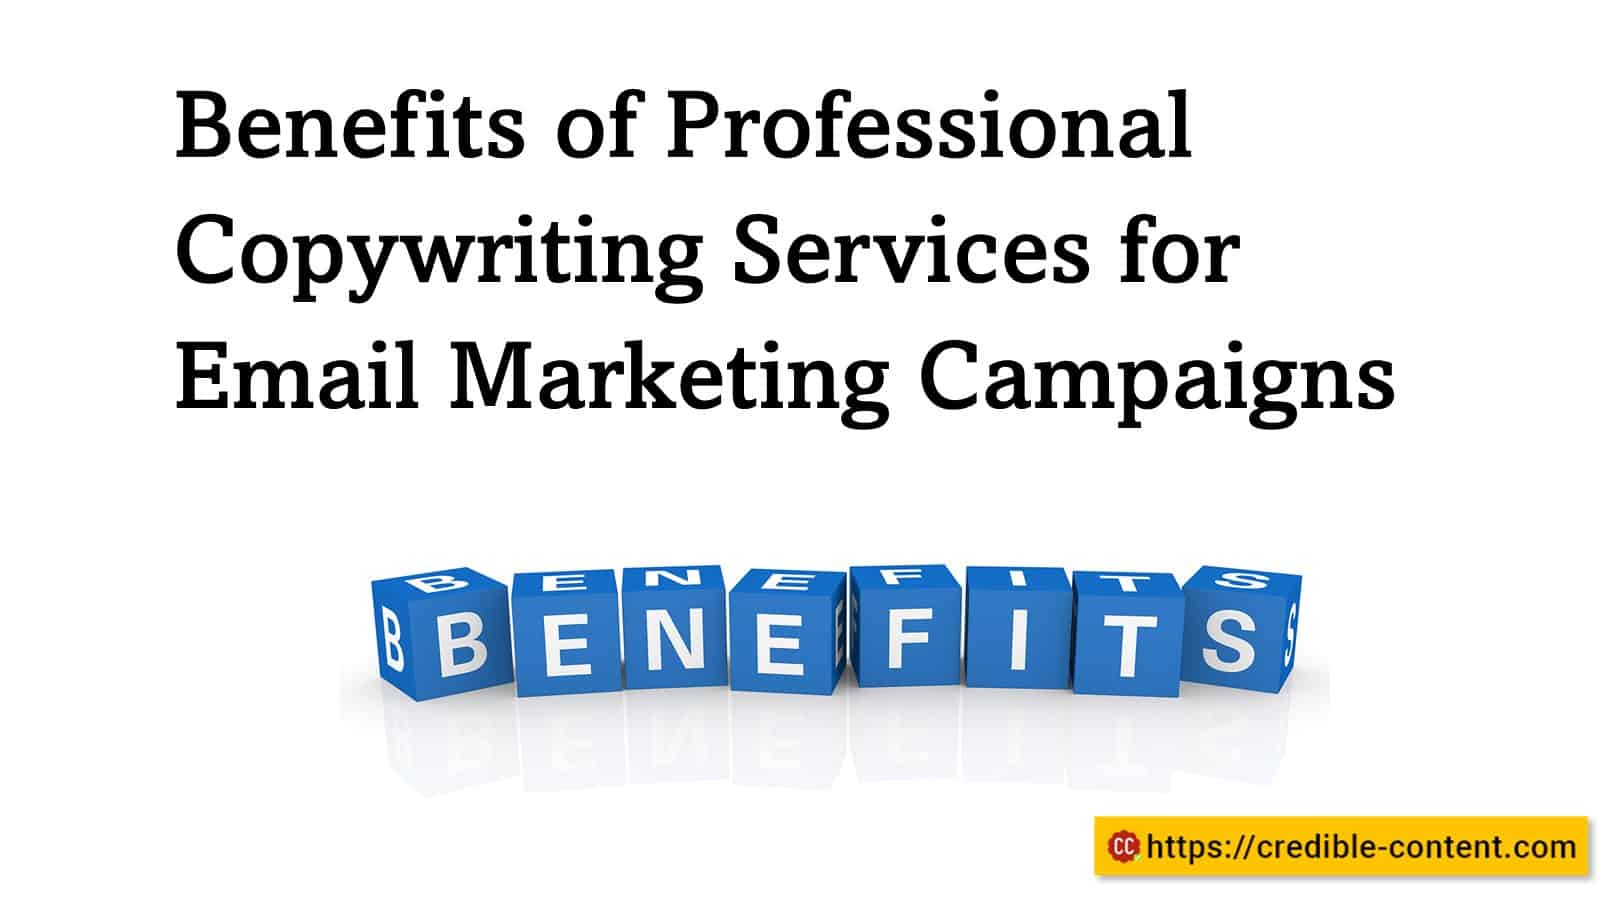 Benefits of Professional Copywriting Services for Email Marketing Campaigns